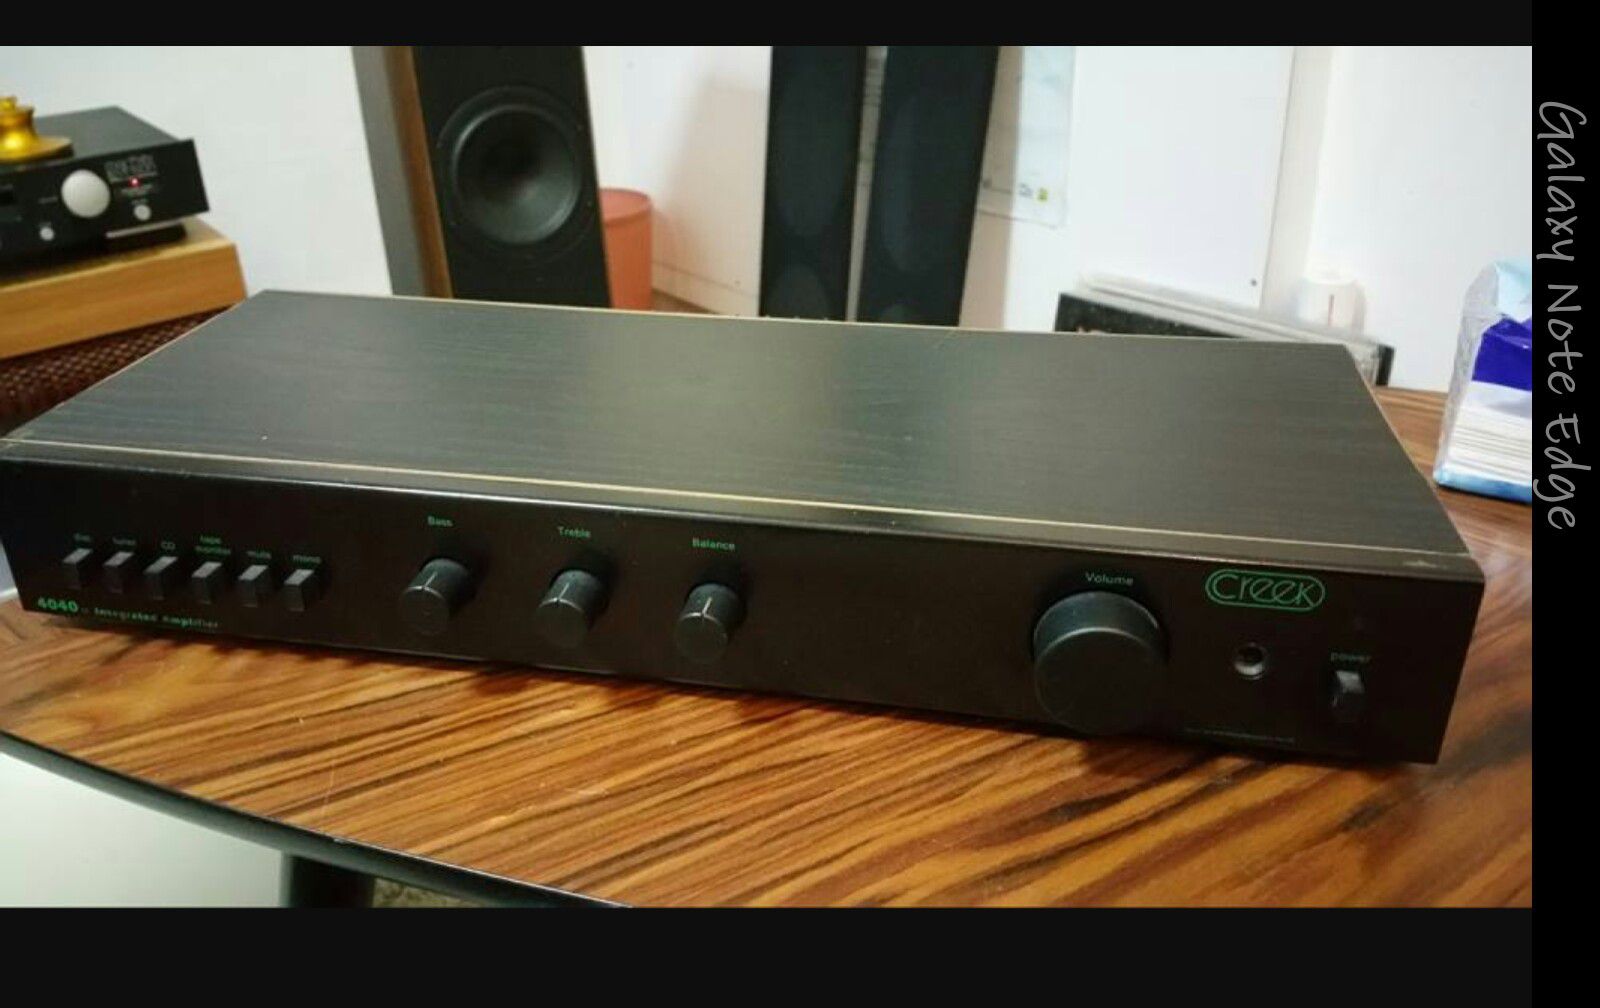 Creek stereo amplifier integrated